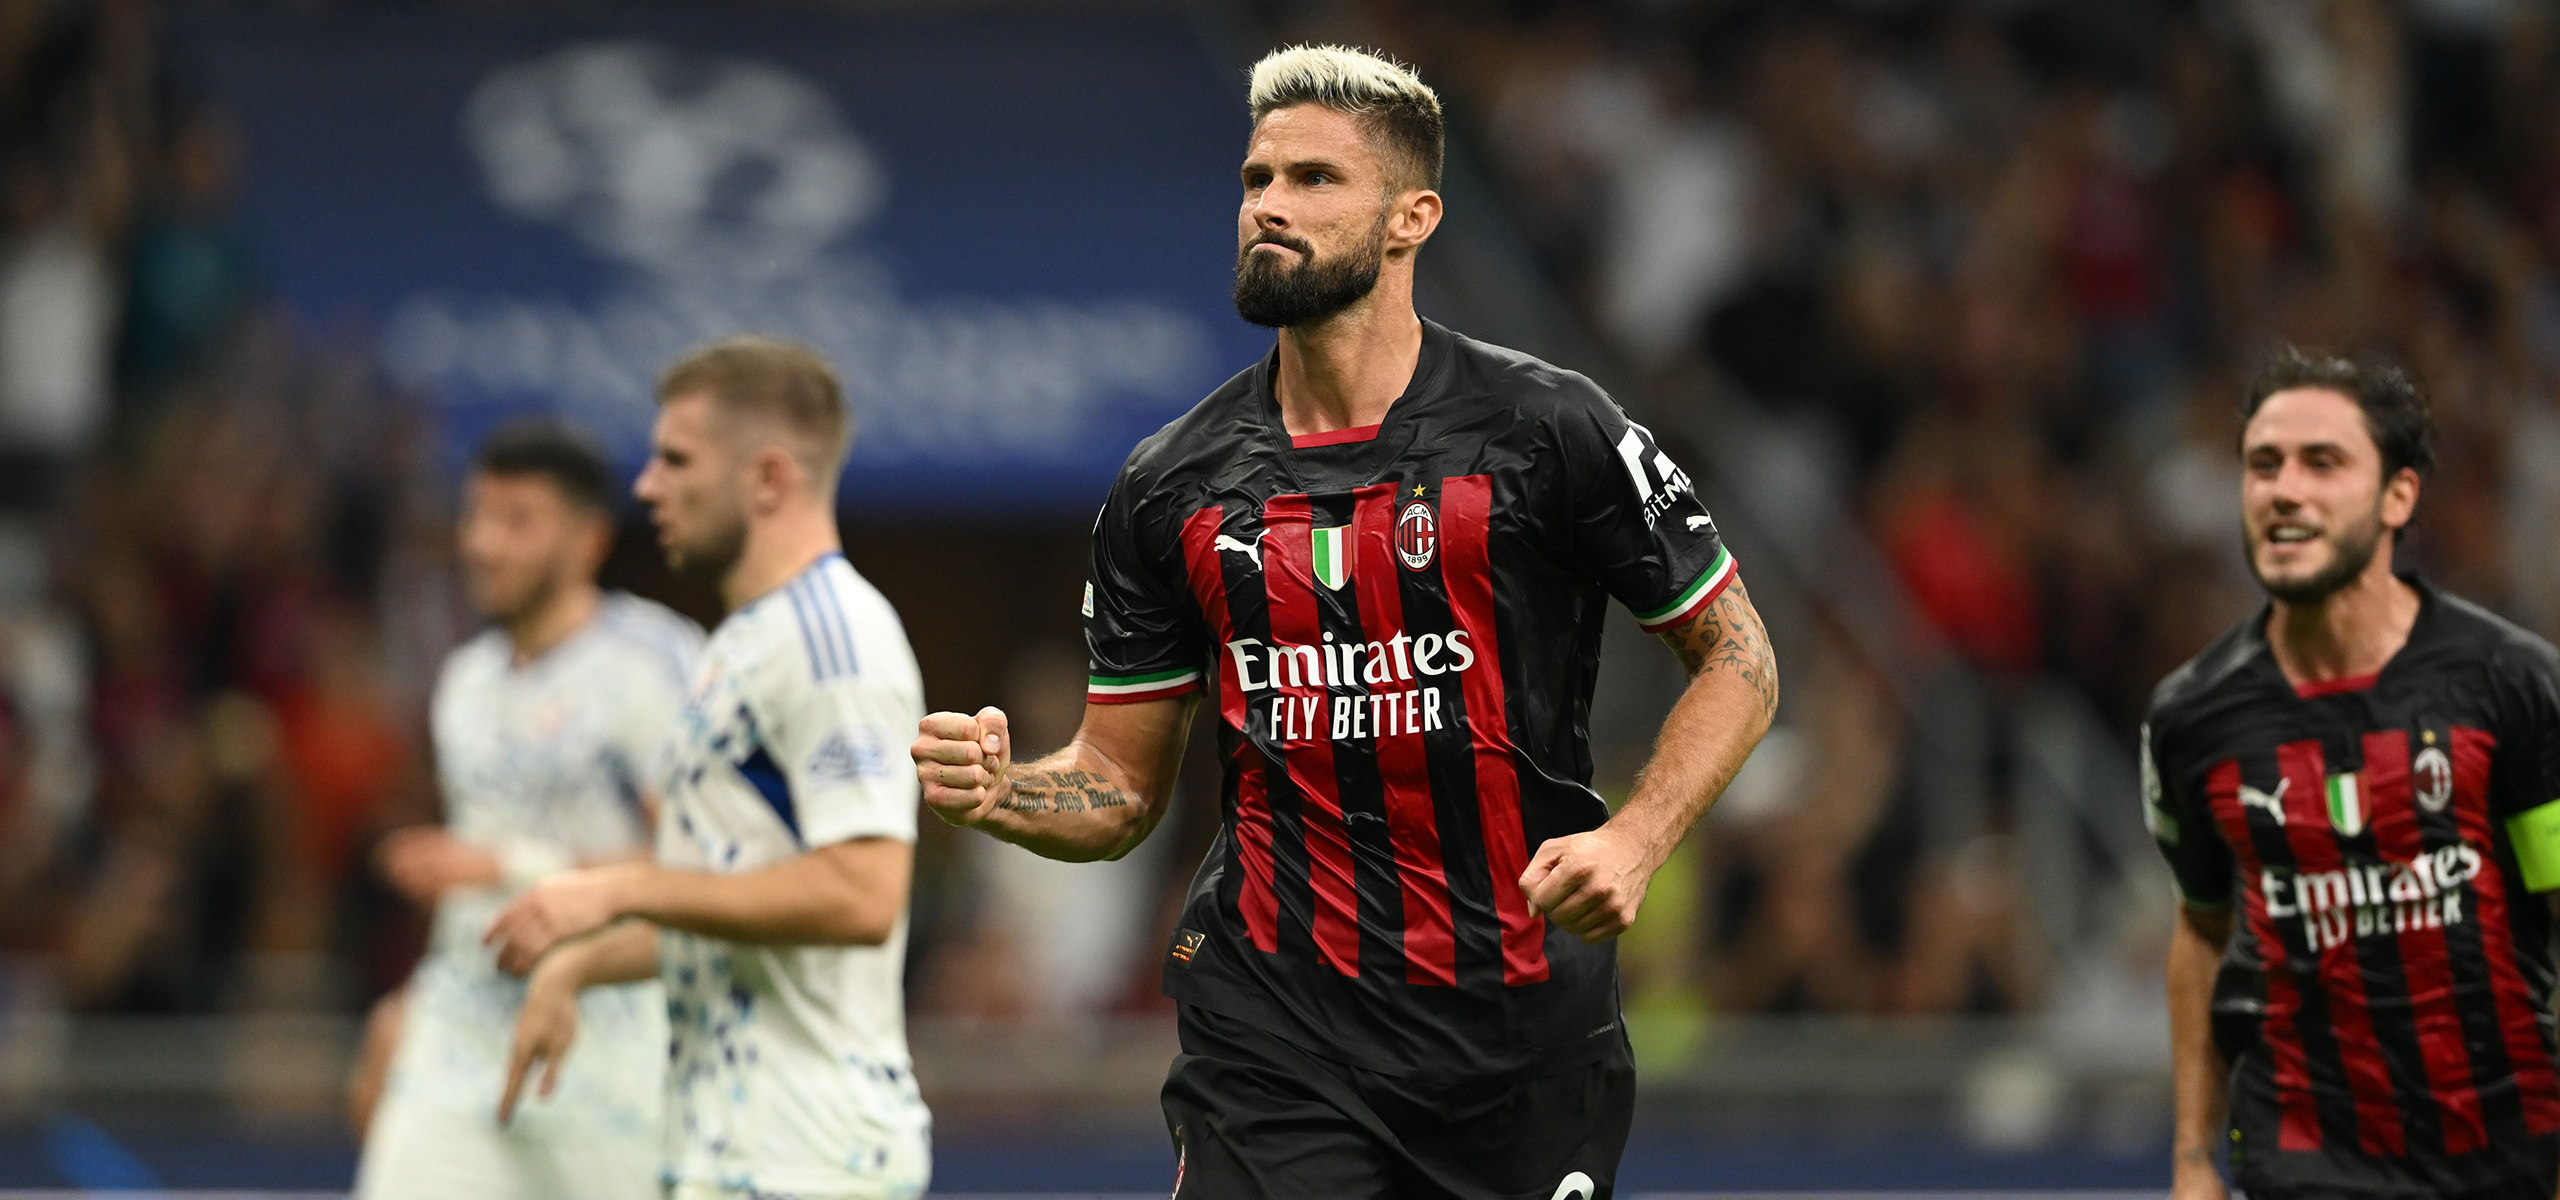 Milan control their destiny in their Champions League group. They will try to get closer to the qualification by beating Dinamo Zagreb Tuesday.